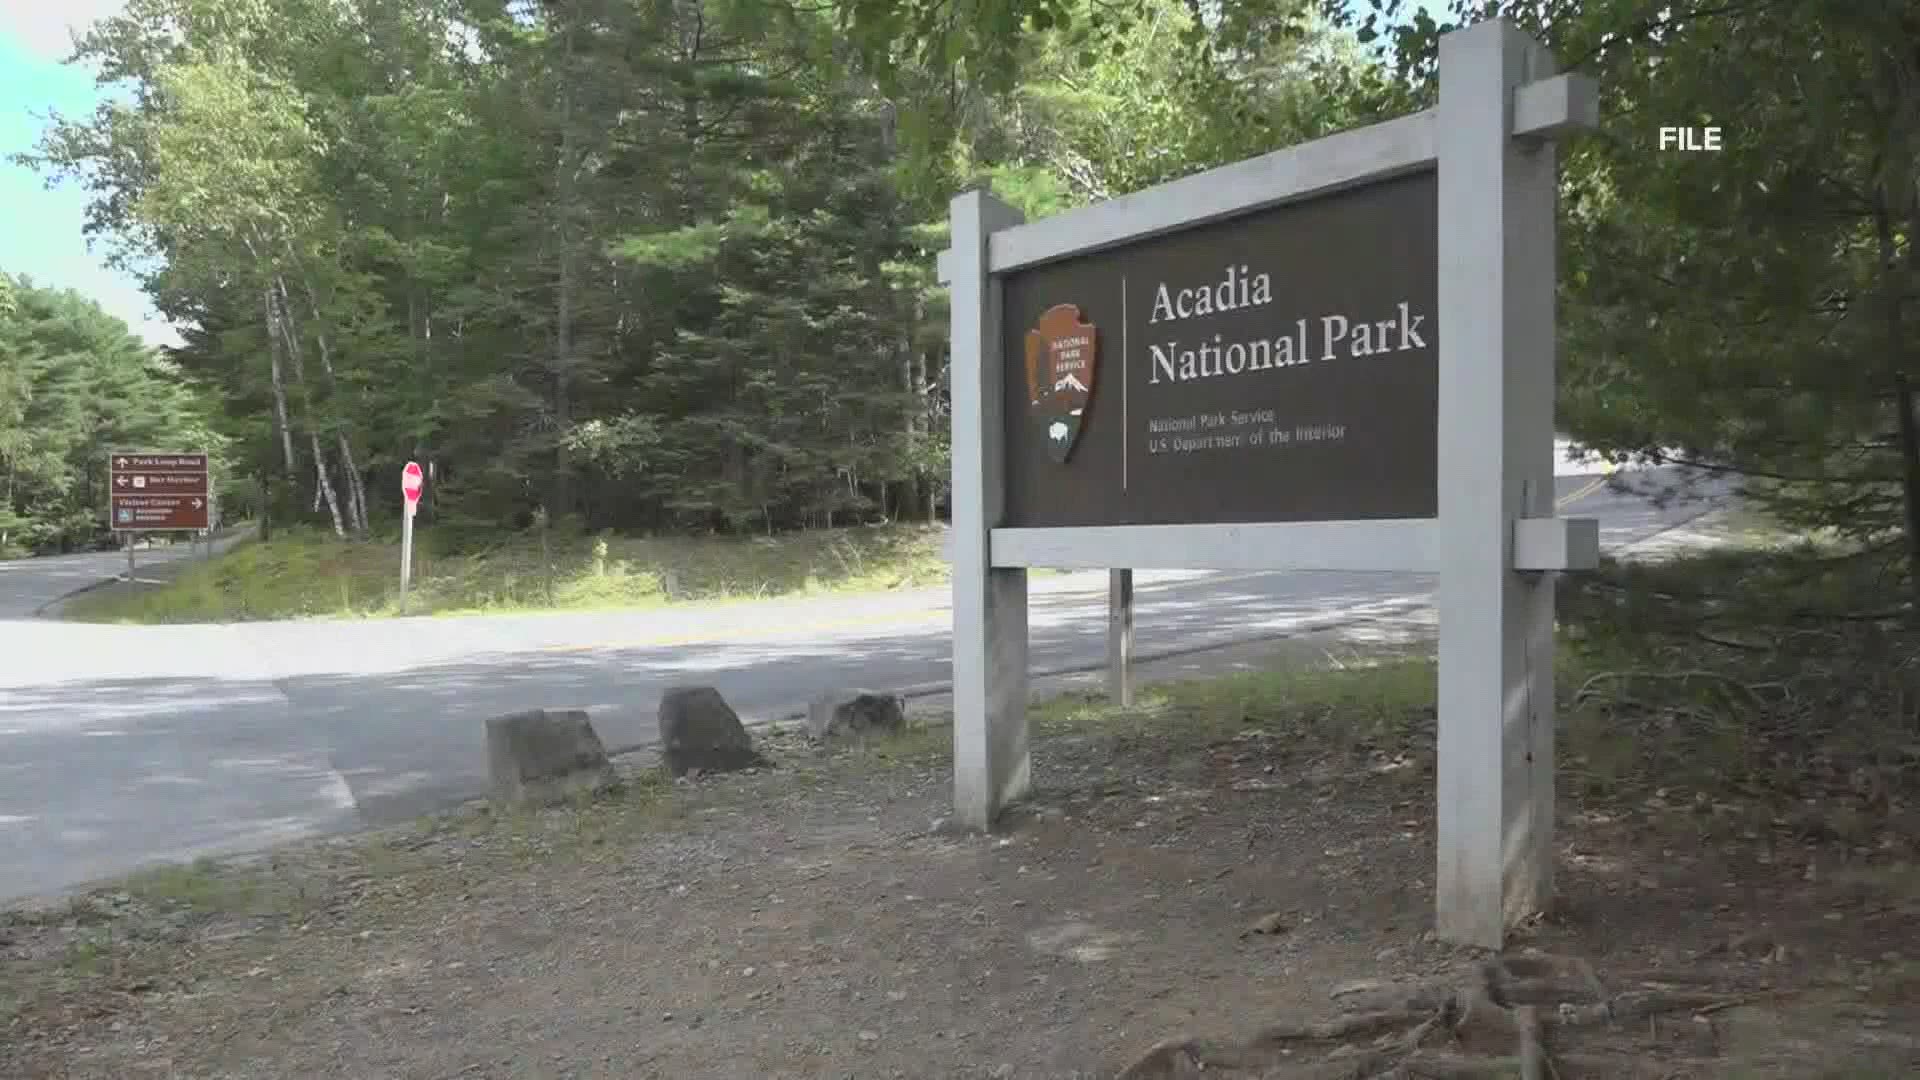 Friends of Acadia help bring the park to your home during COVID-19 pandemic